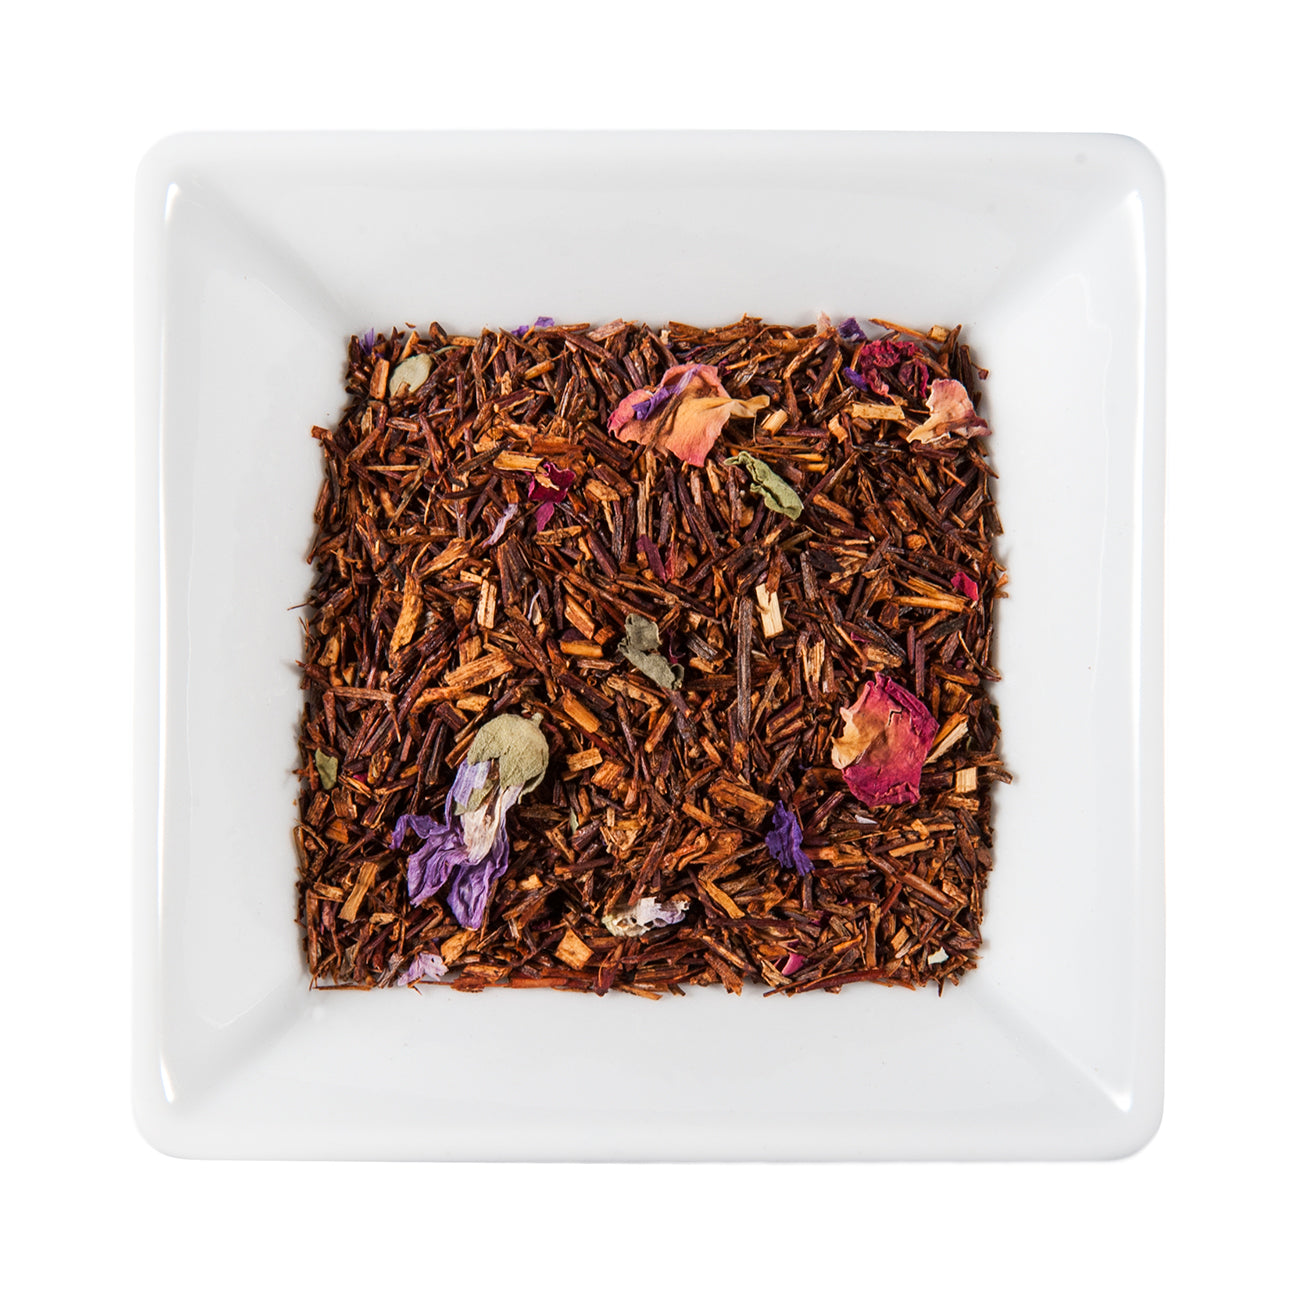 Rooibos Cranberry